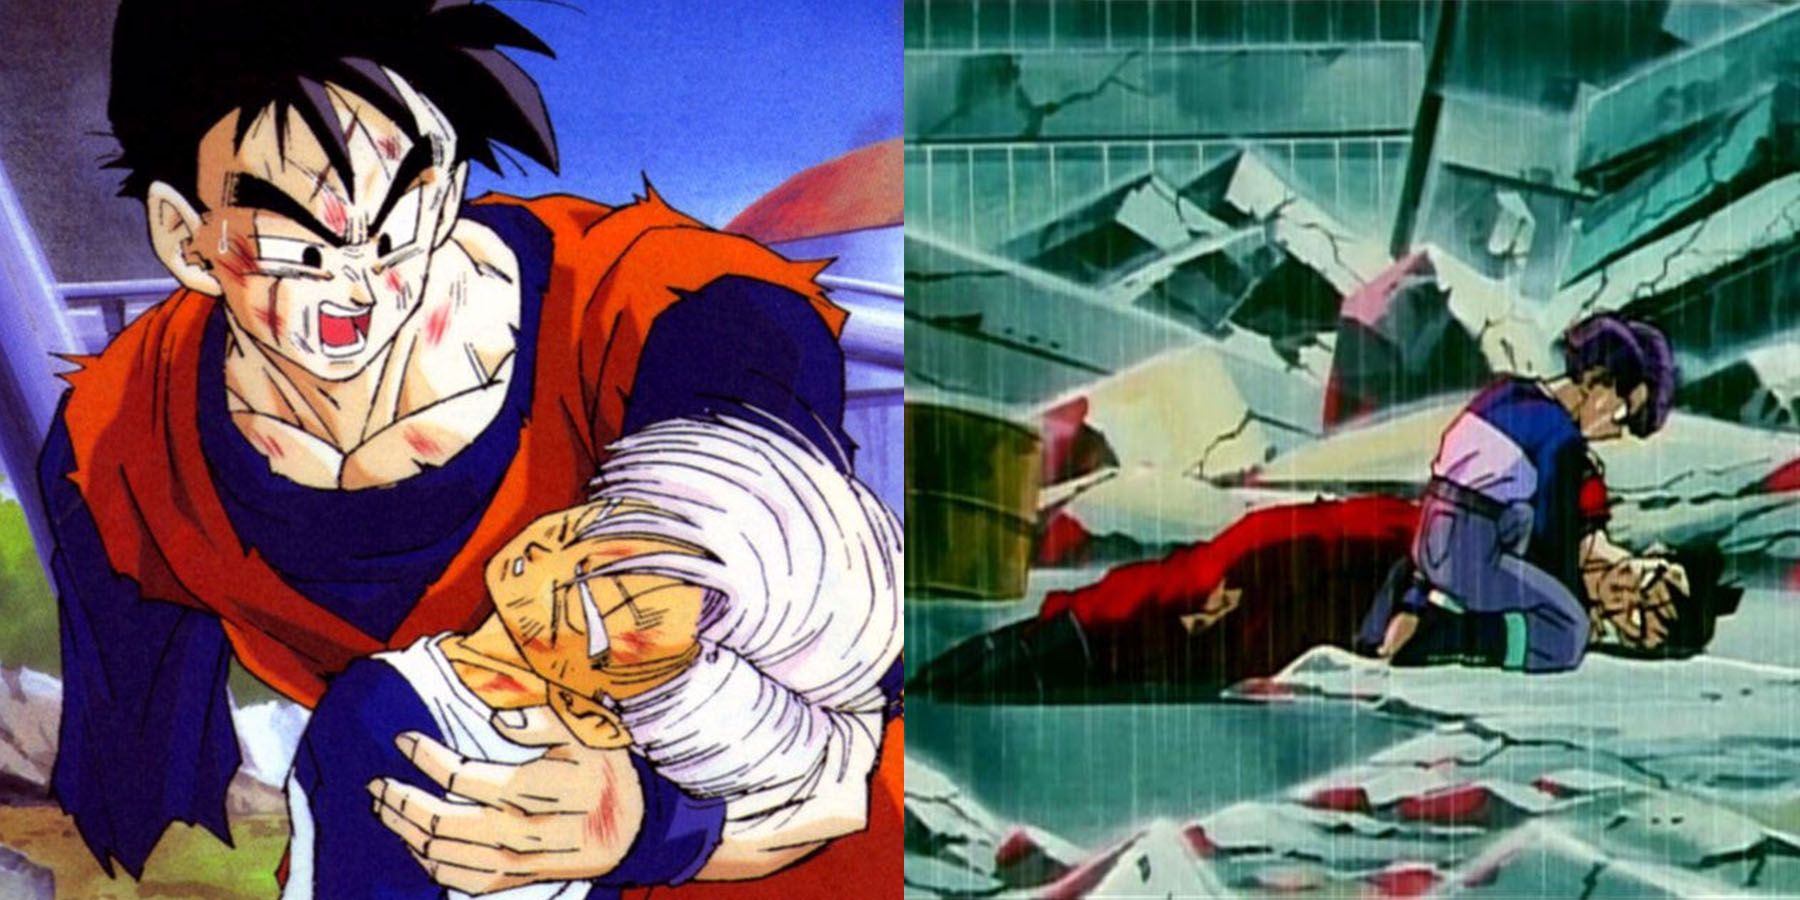 Sons Goku 10 Dark Facts About DBZs Gohan (And 10 More About Goten)